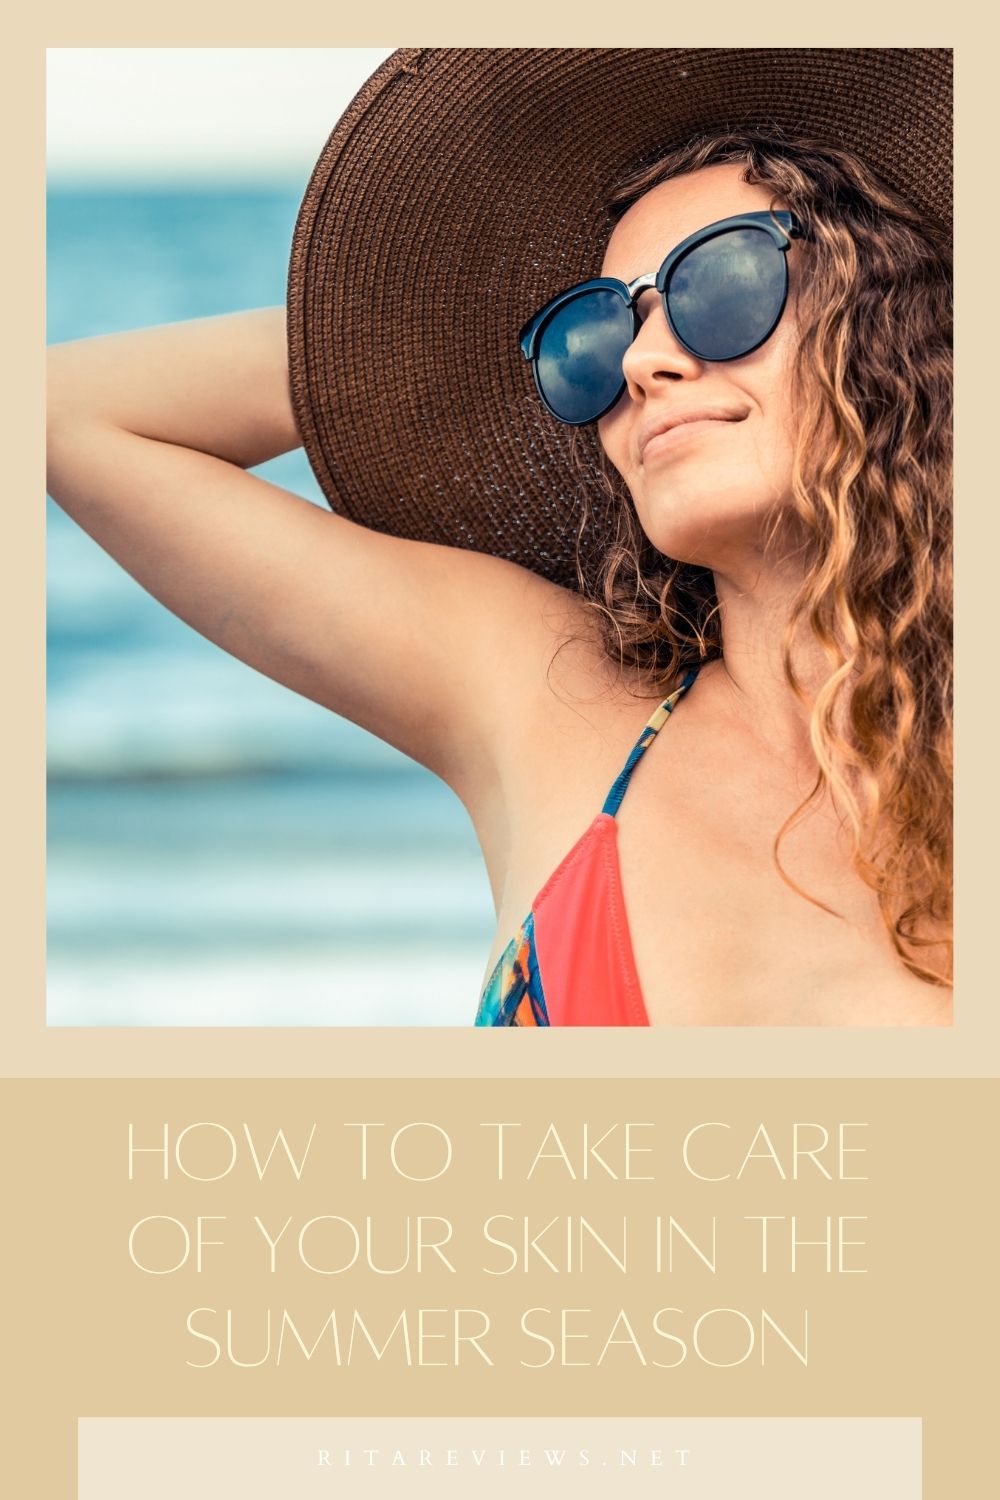 How To Take Care Of Your Skin In The Summer Season